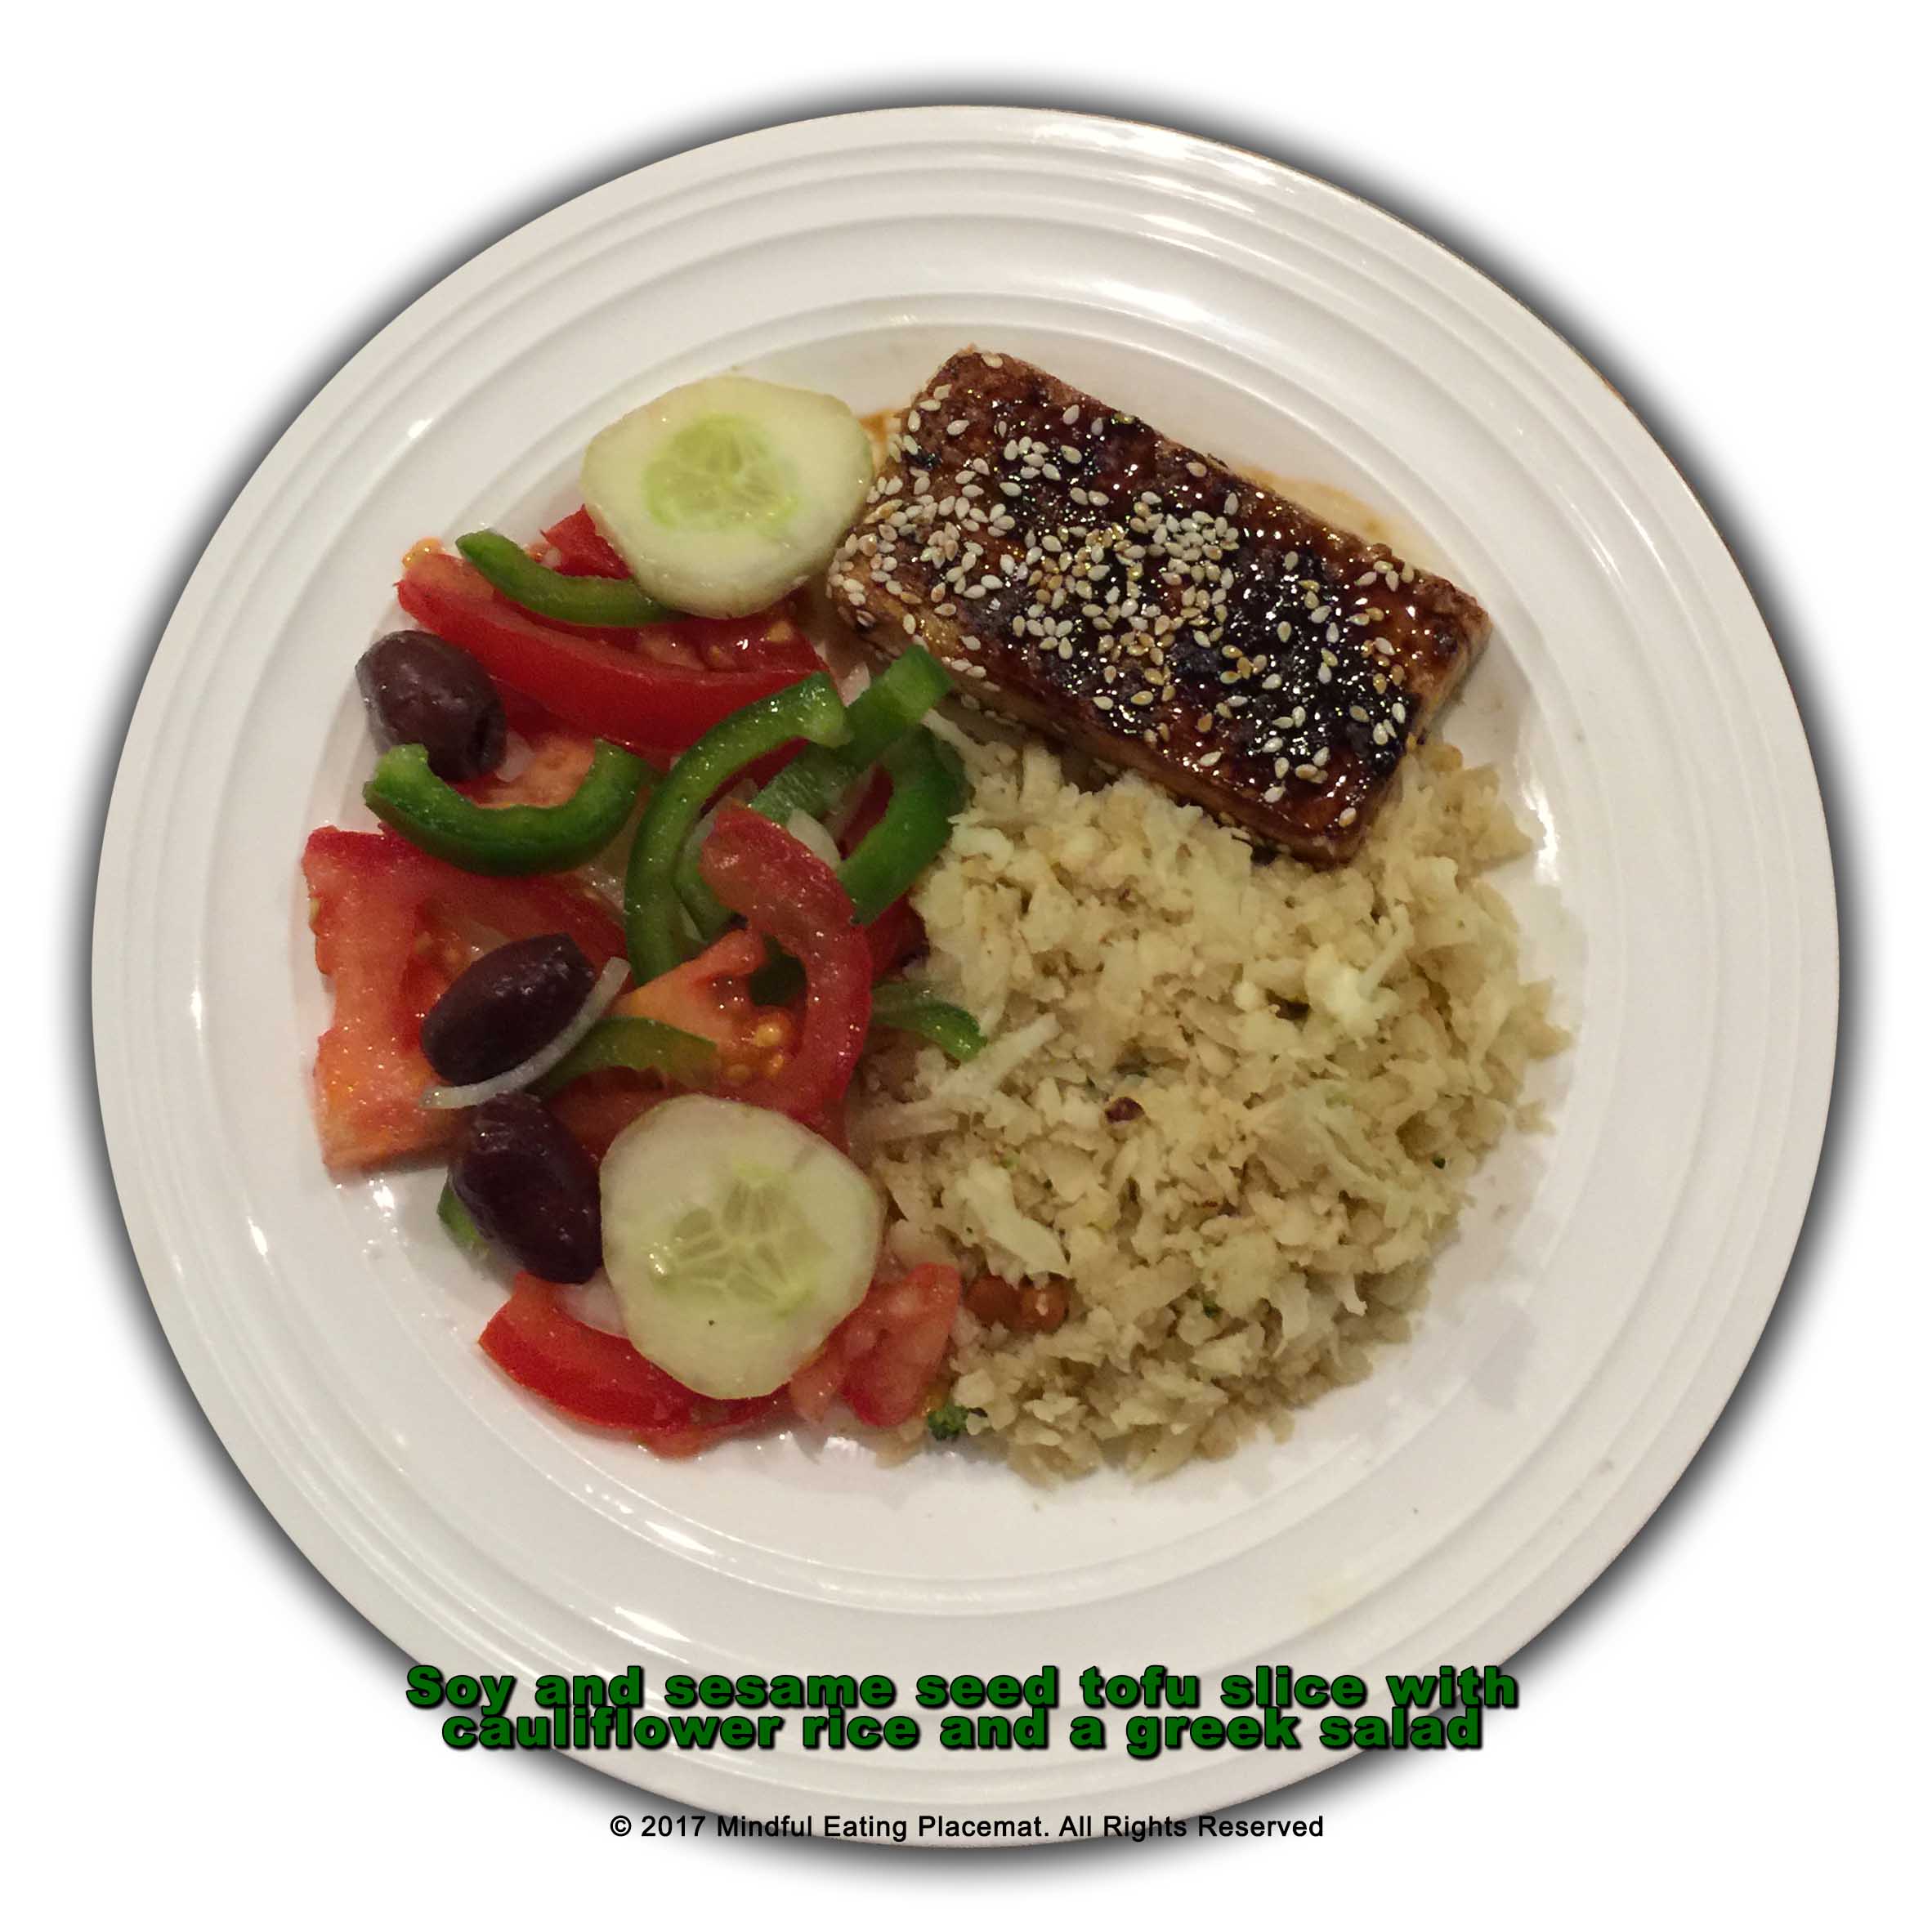 Soy and sesame seed tofu slice with cauliflower rice and a greek salad